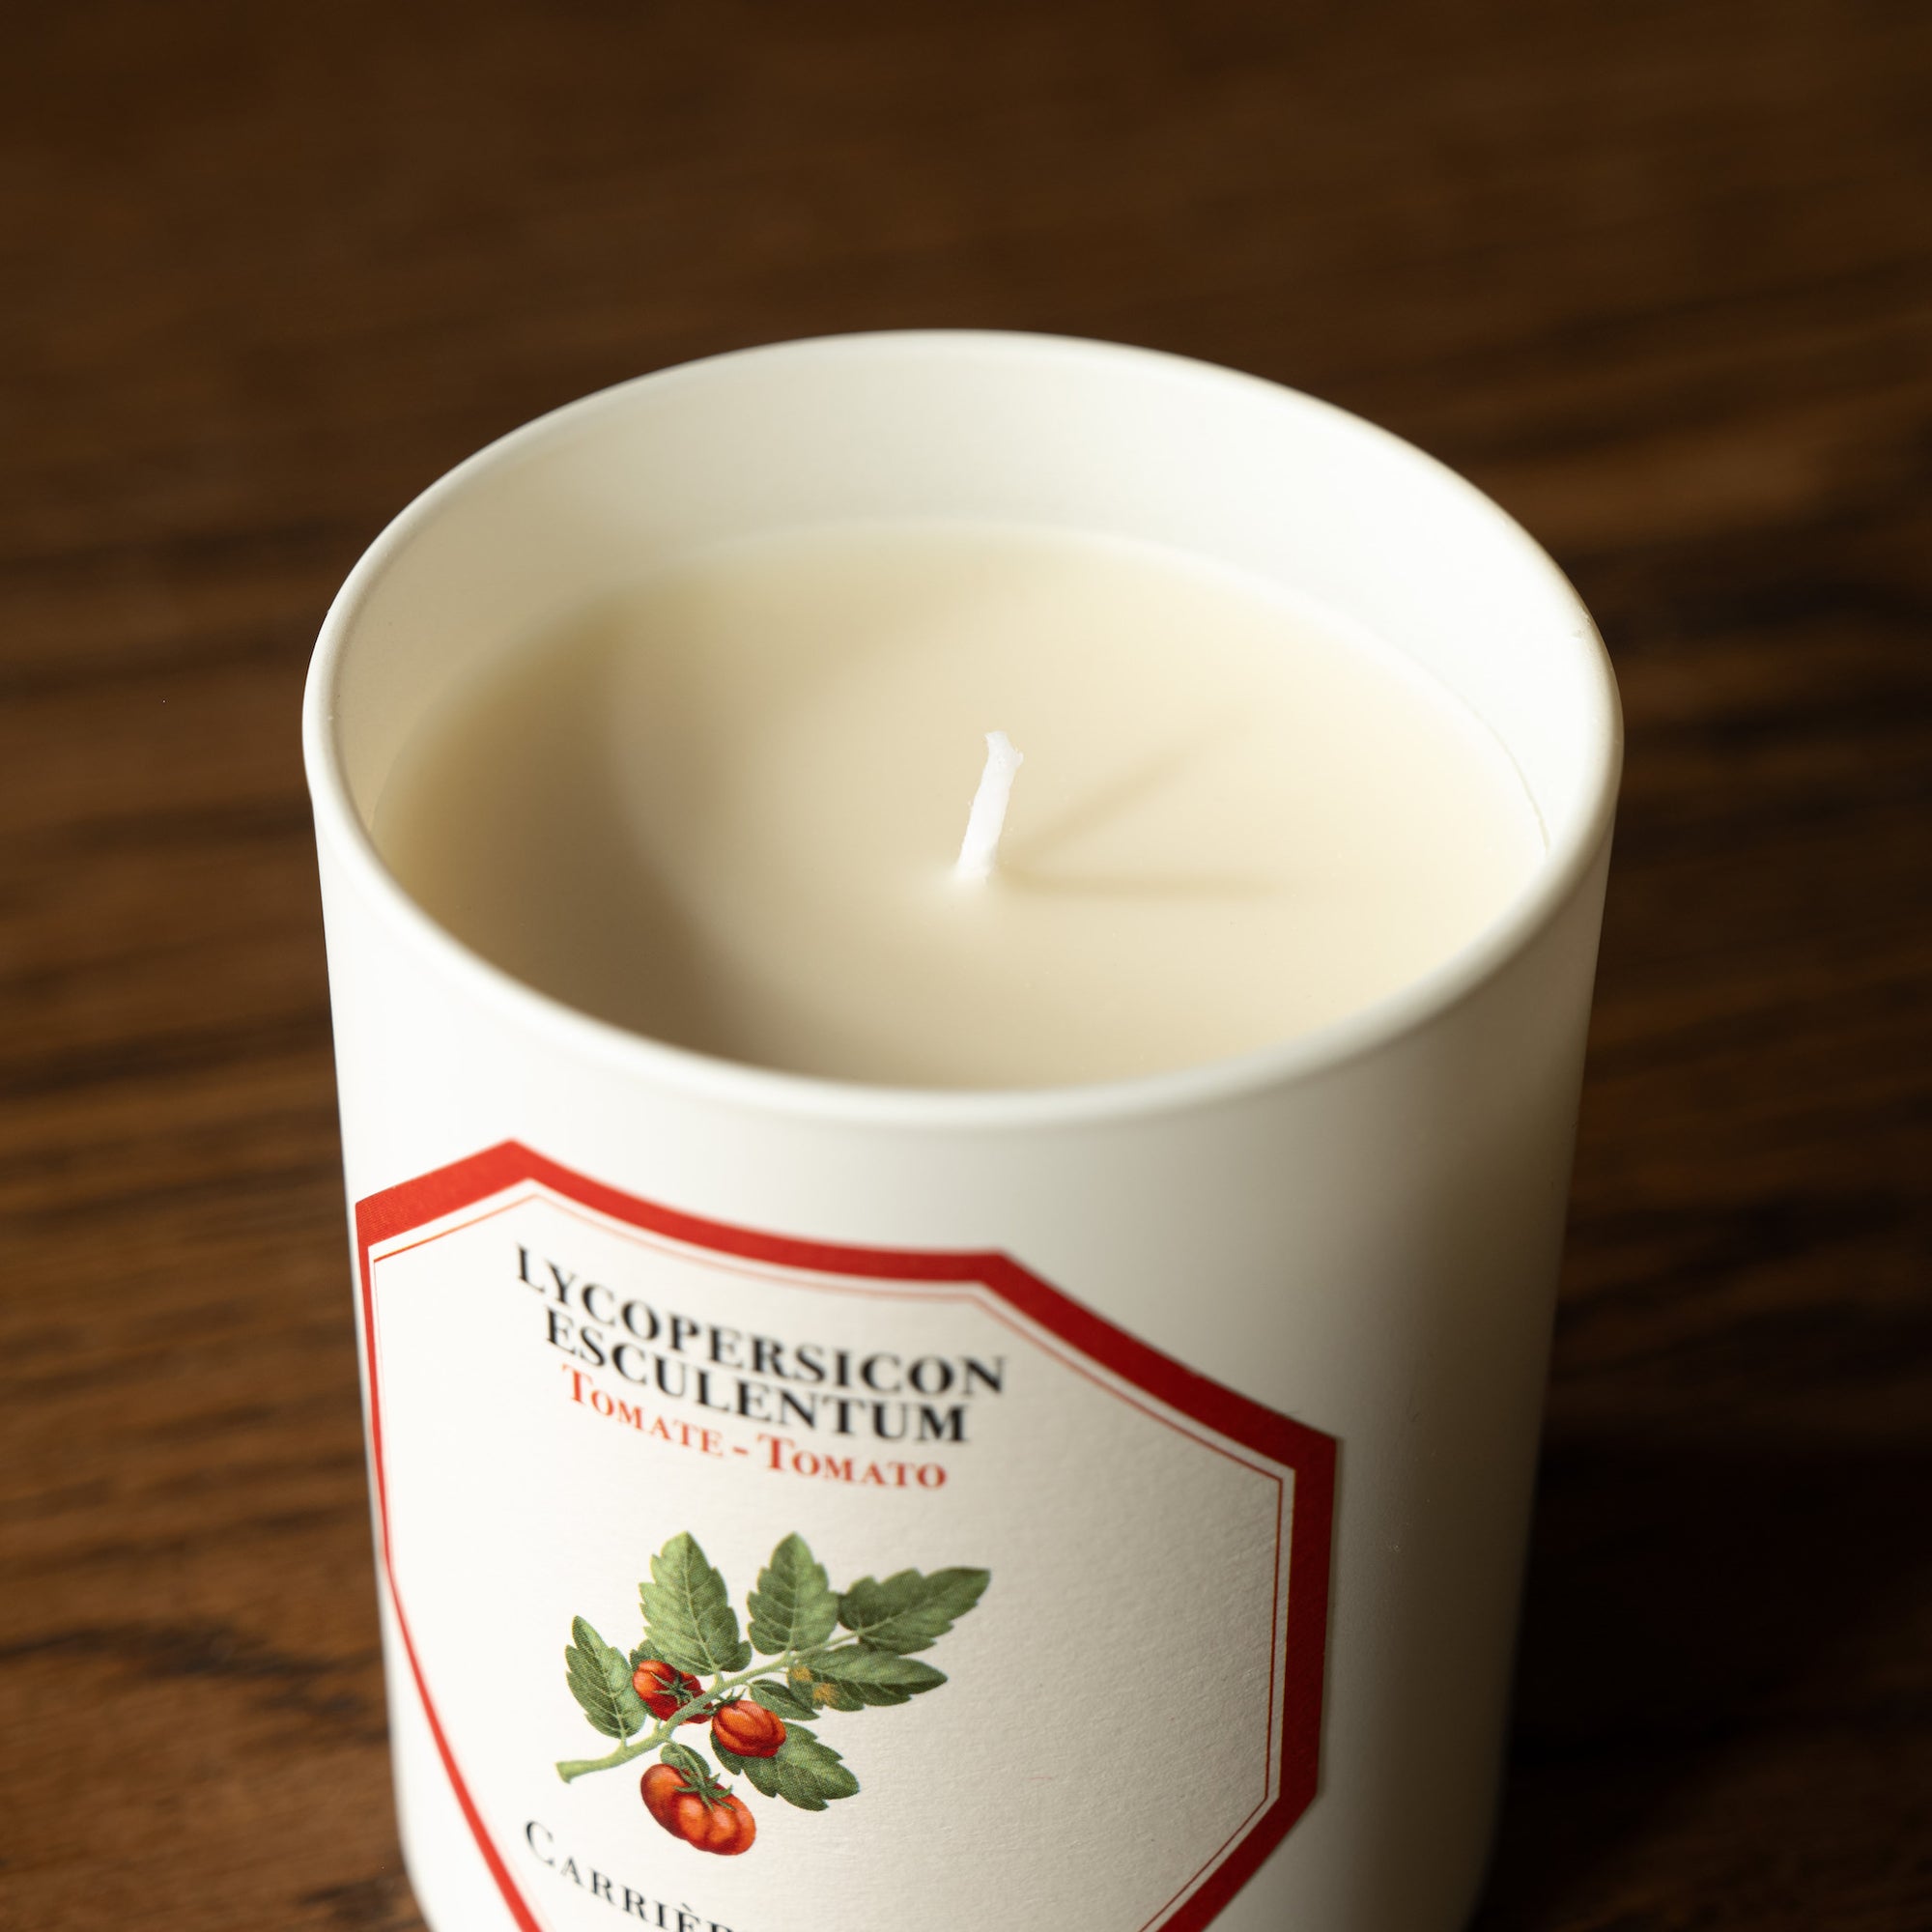 Carriere Freres Tomato Candle wax & wick